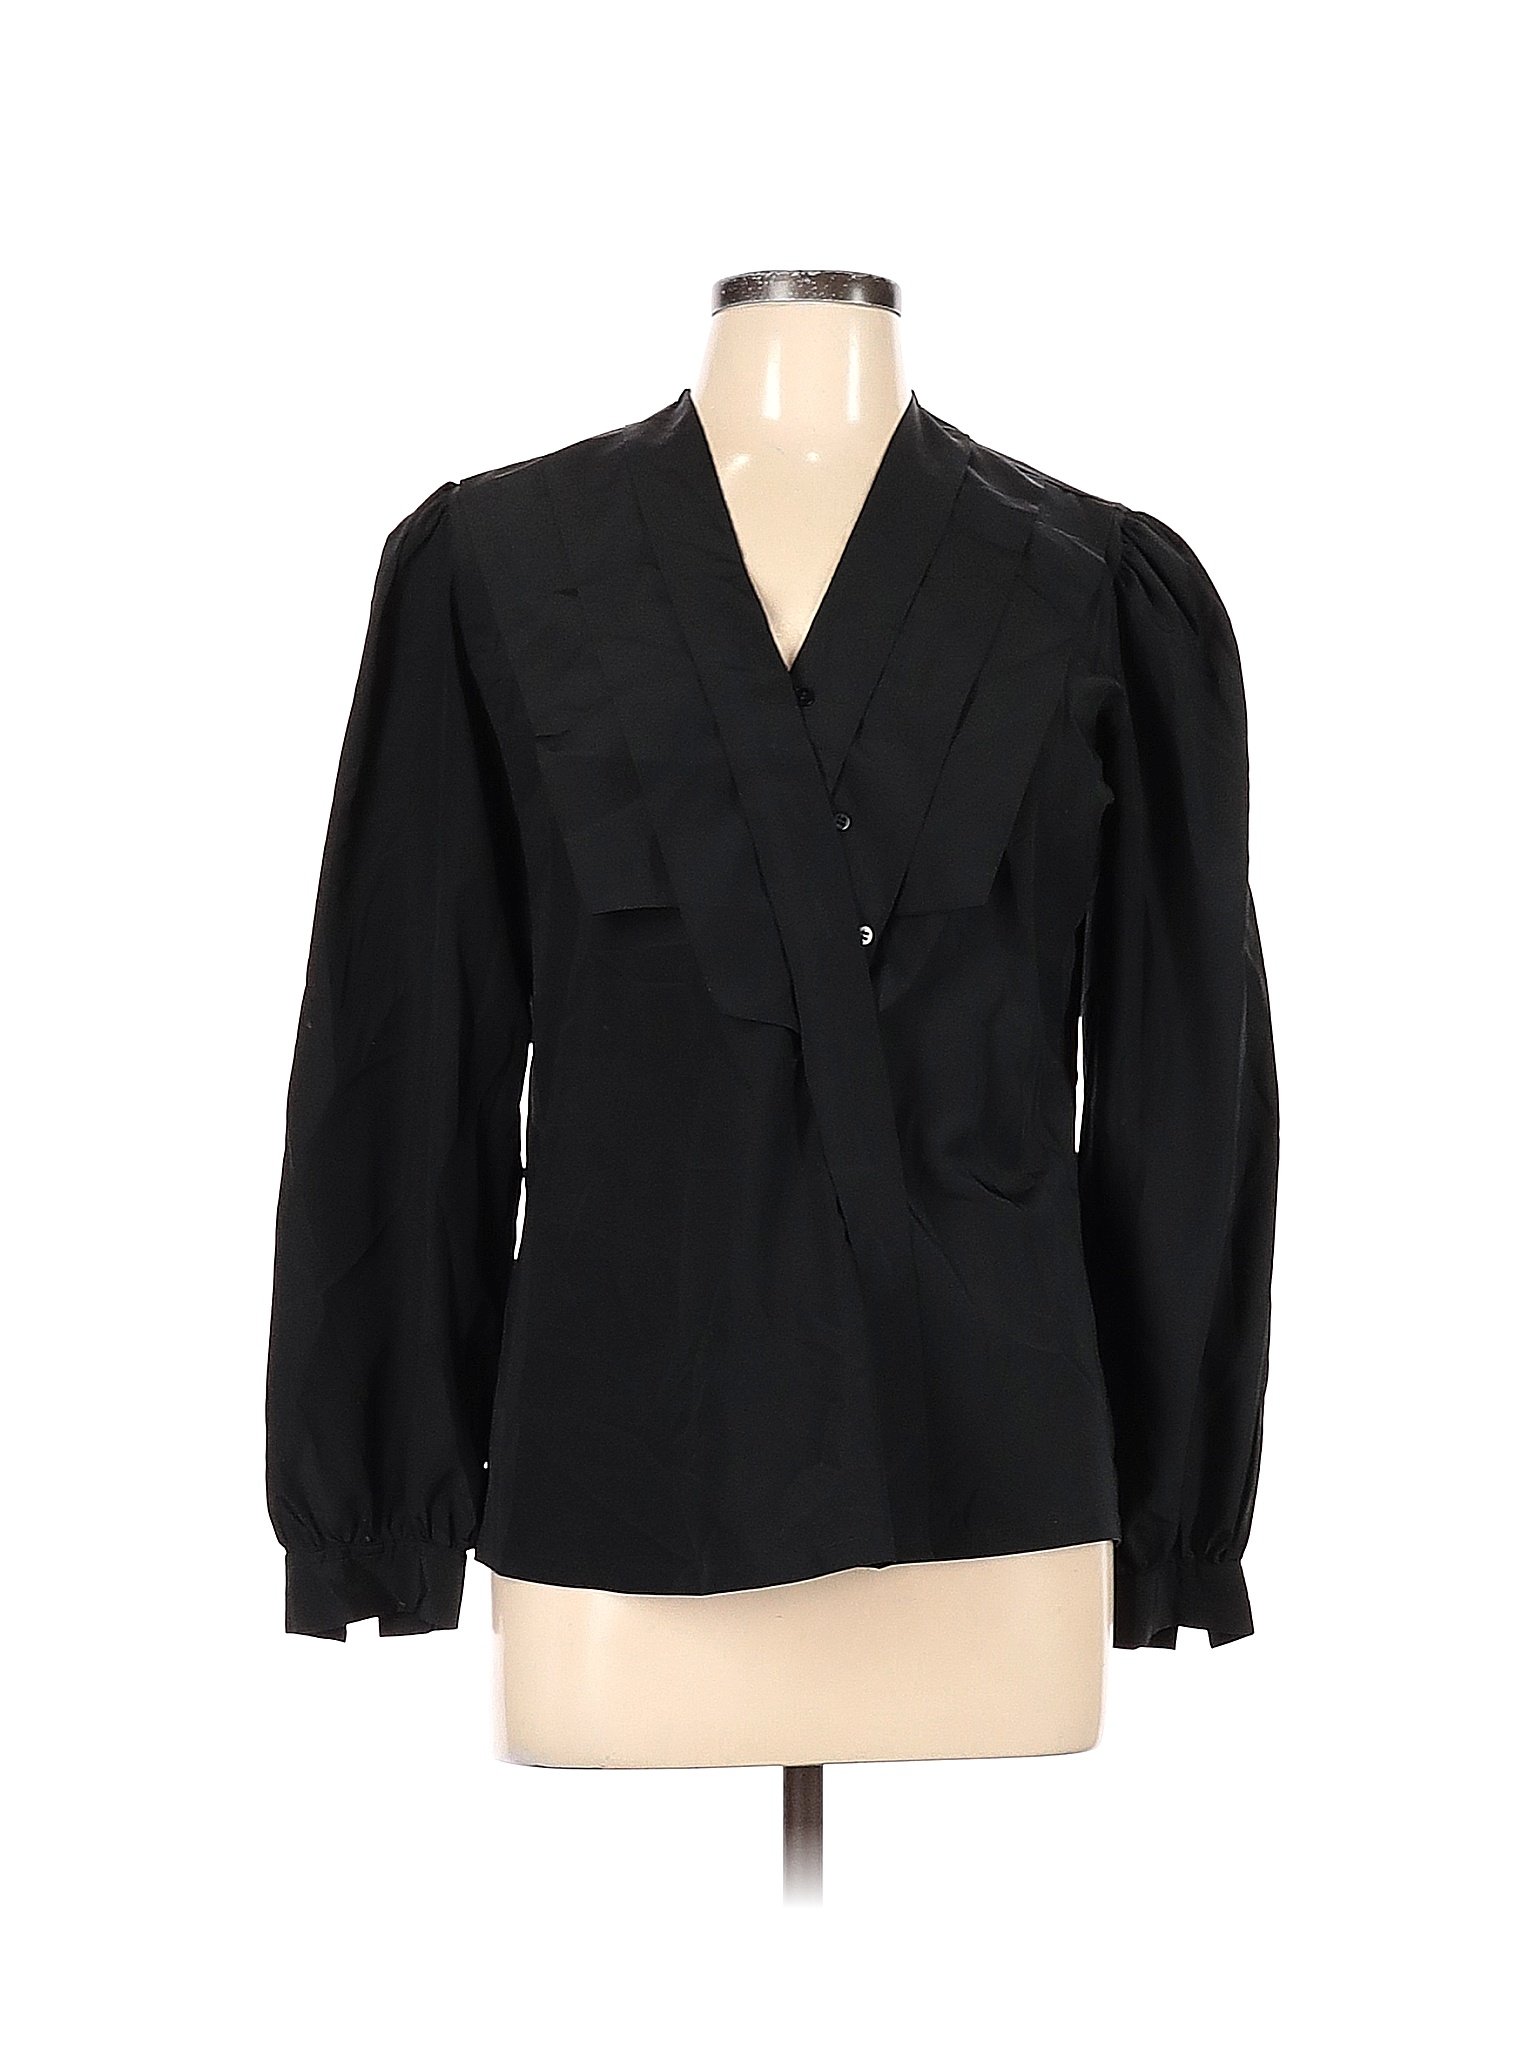 Gailord 100% Polyester Solid Black Long Sleeve Blouse Size 12 - 75% off ...